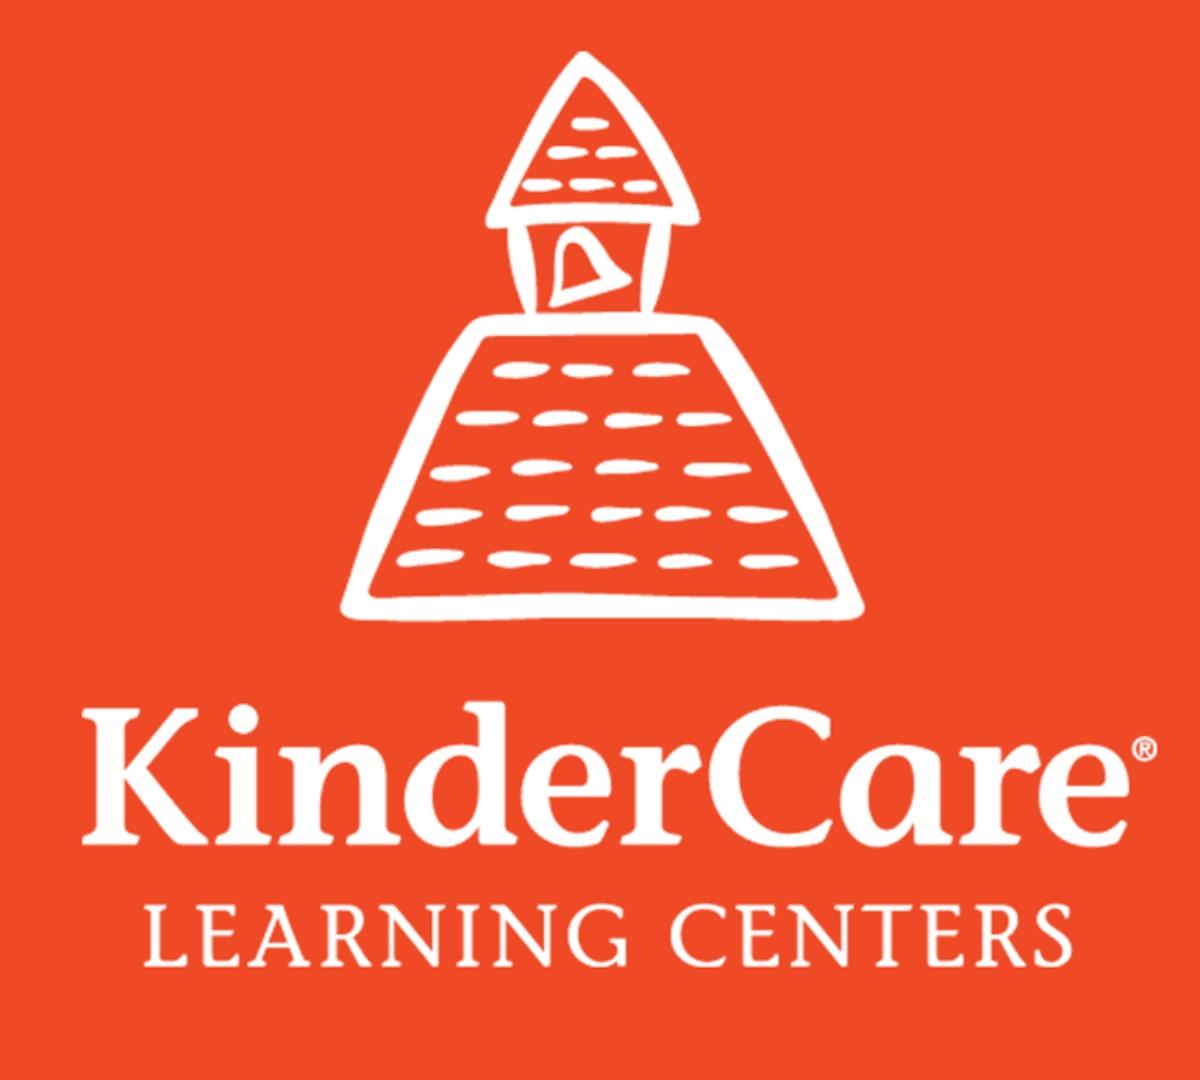 When Is The KinderCare IPO Date?